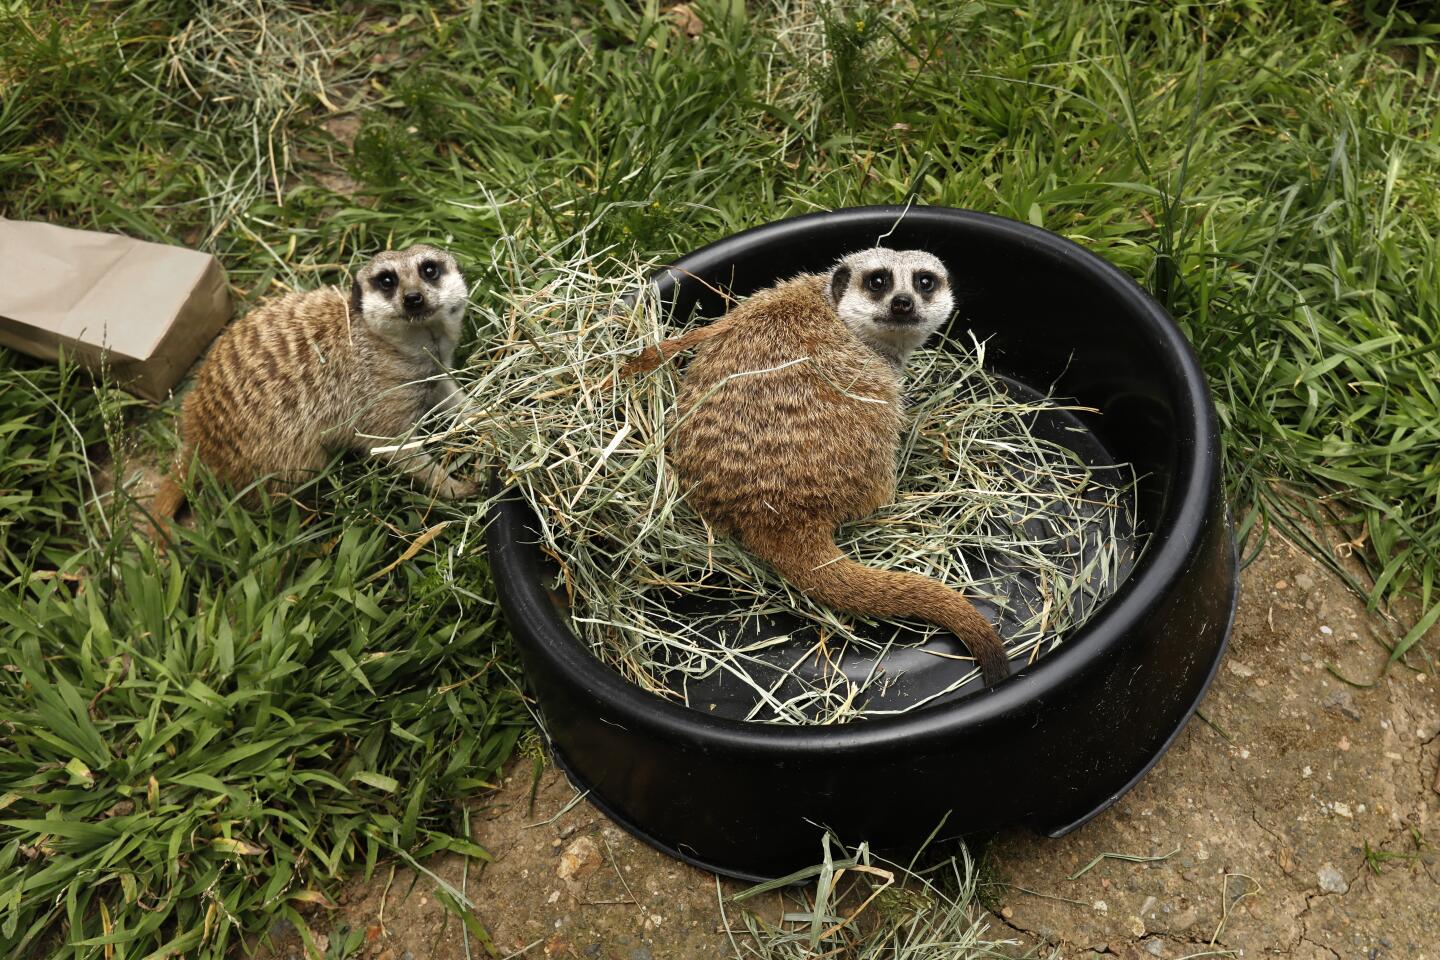 OAKLAND, CALIFORNIA-APRIL 20, 2020-Two meerkats get their daily worms and feed. The Oakland Zoo is closed due to the coronavirus, leaving the zoo without ticket sales. The costs of operating the zoo is 2 million dollars per month. (Carolyn Cole / Los Angeles Times)